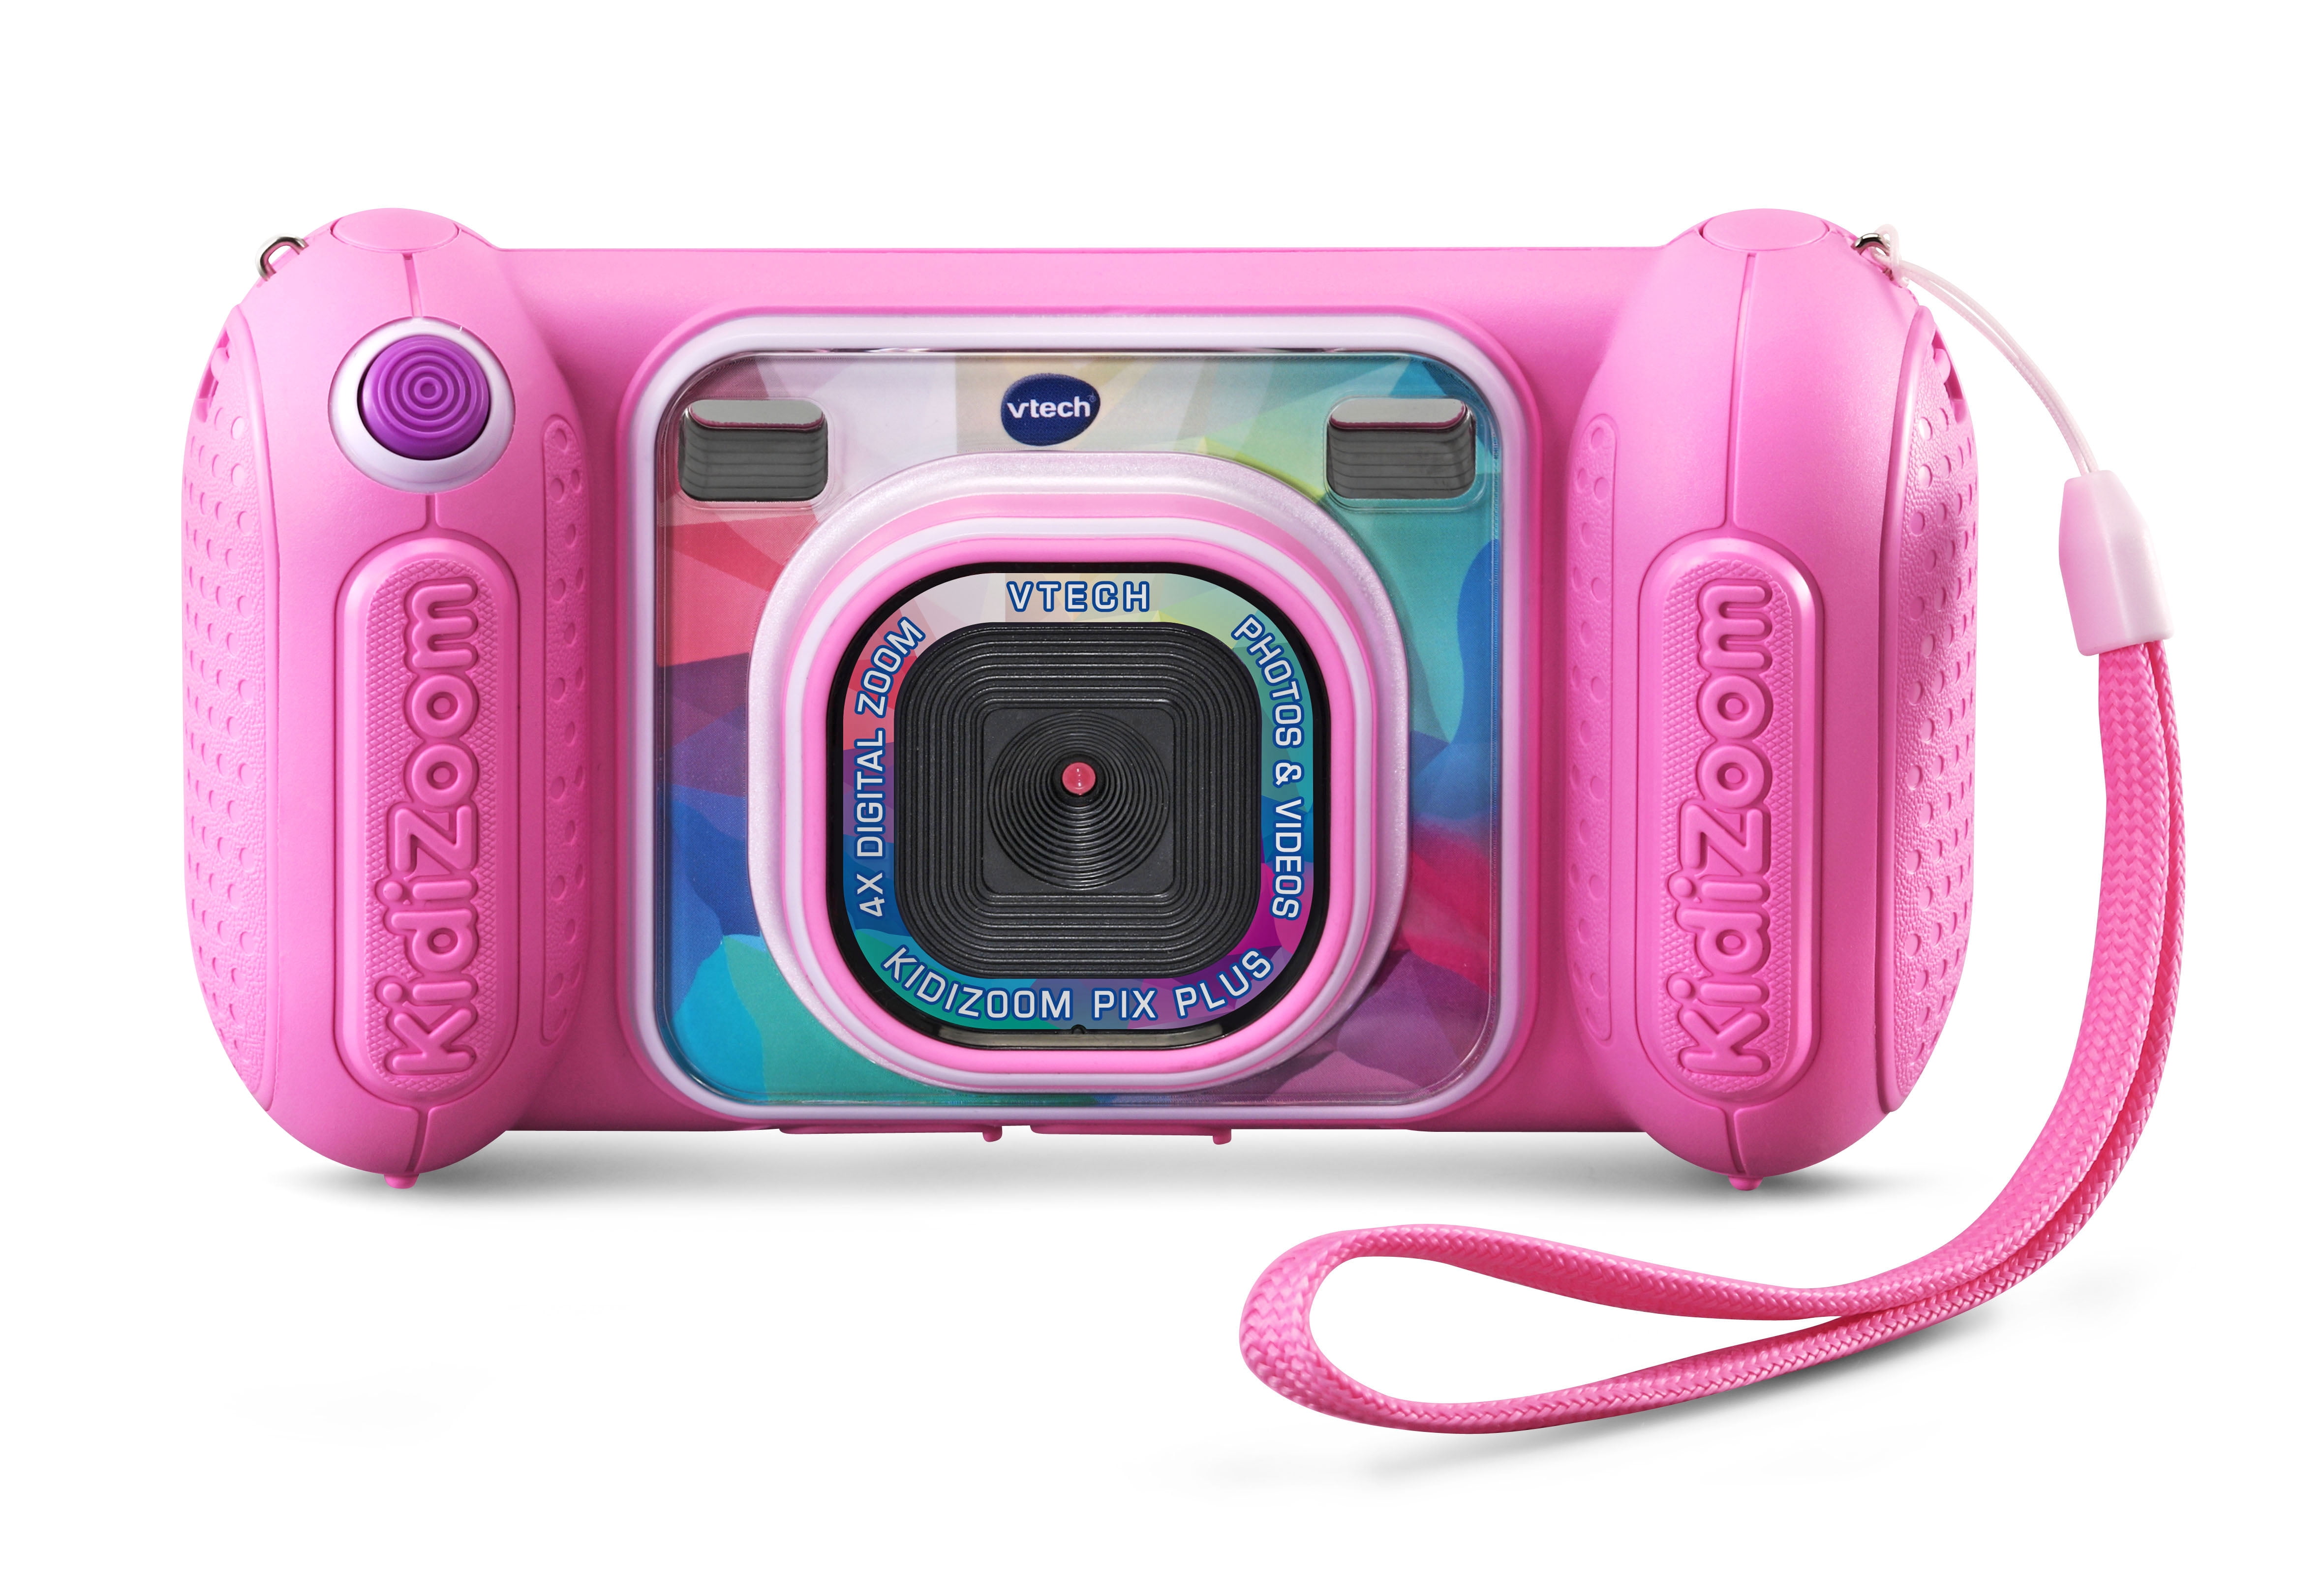 80507150 for sale online VTech Kidizoom Duo 5.0 Deluxe Digital Selfie Camera with Mp3 Player 